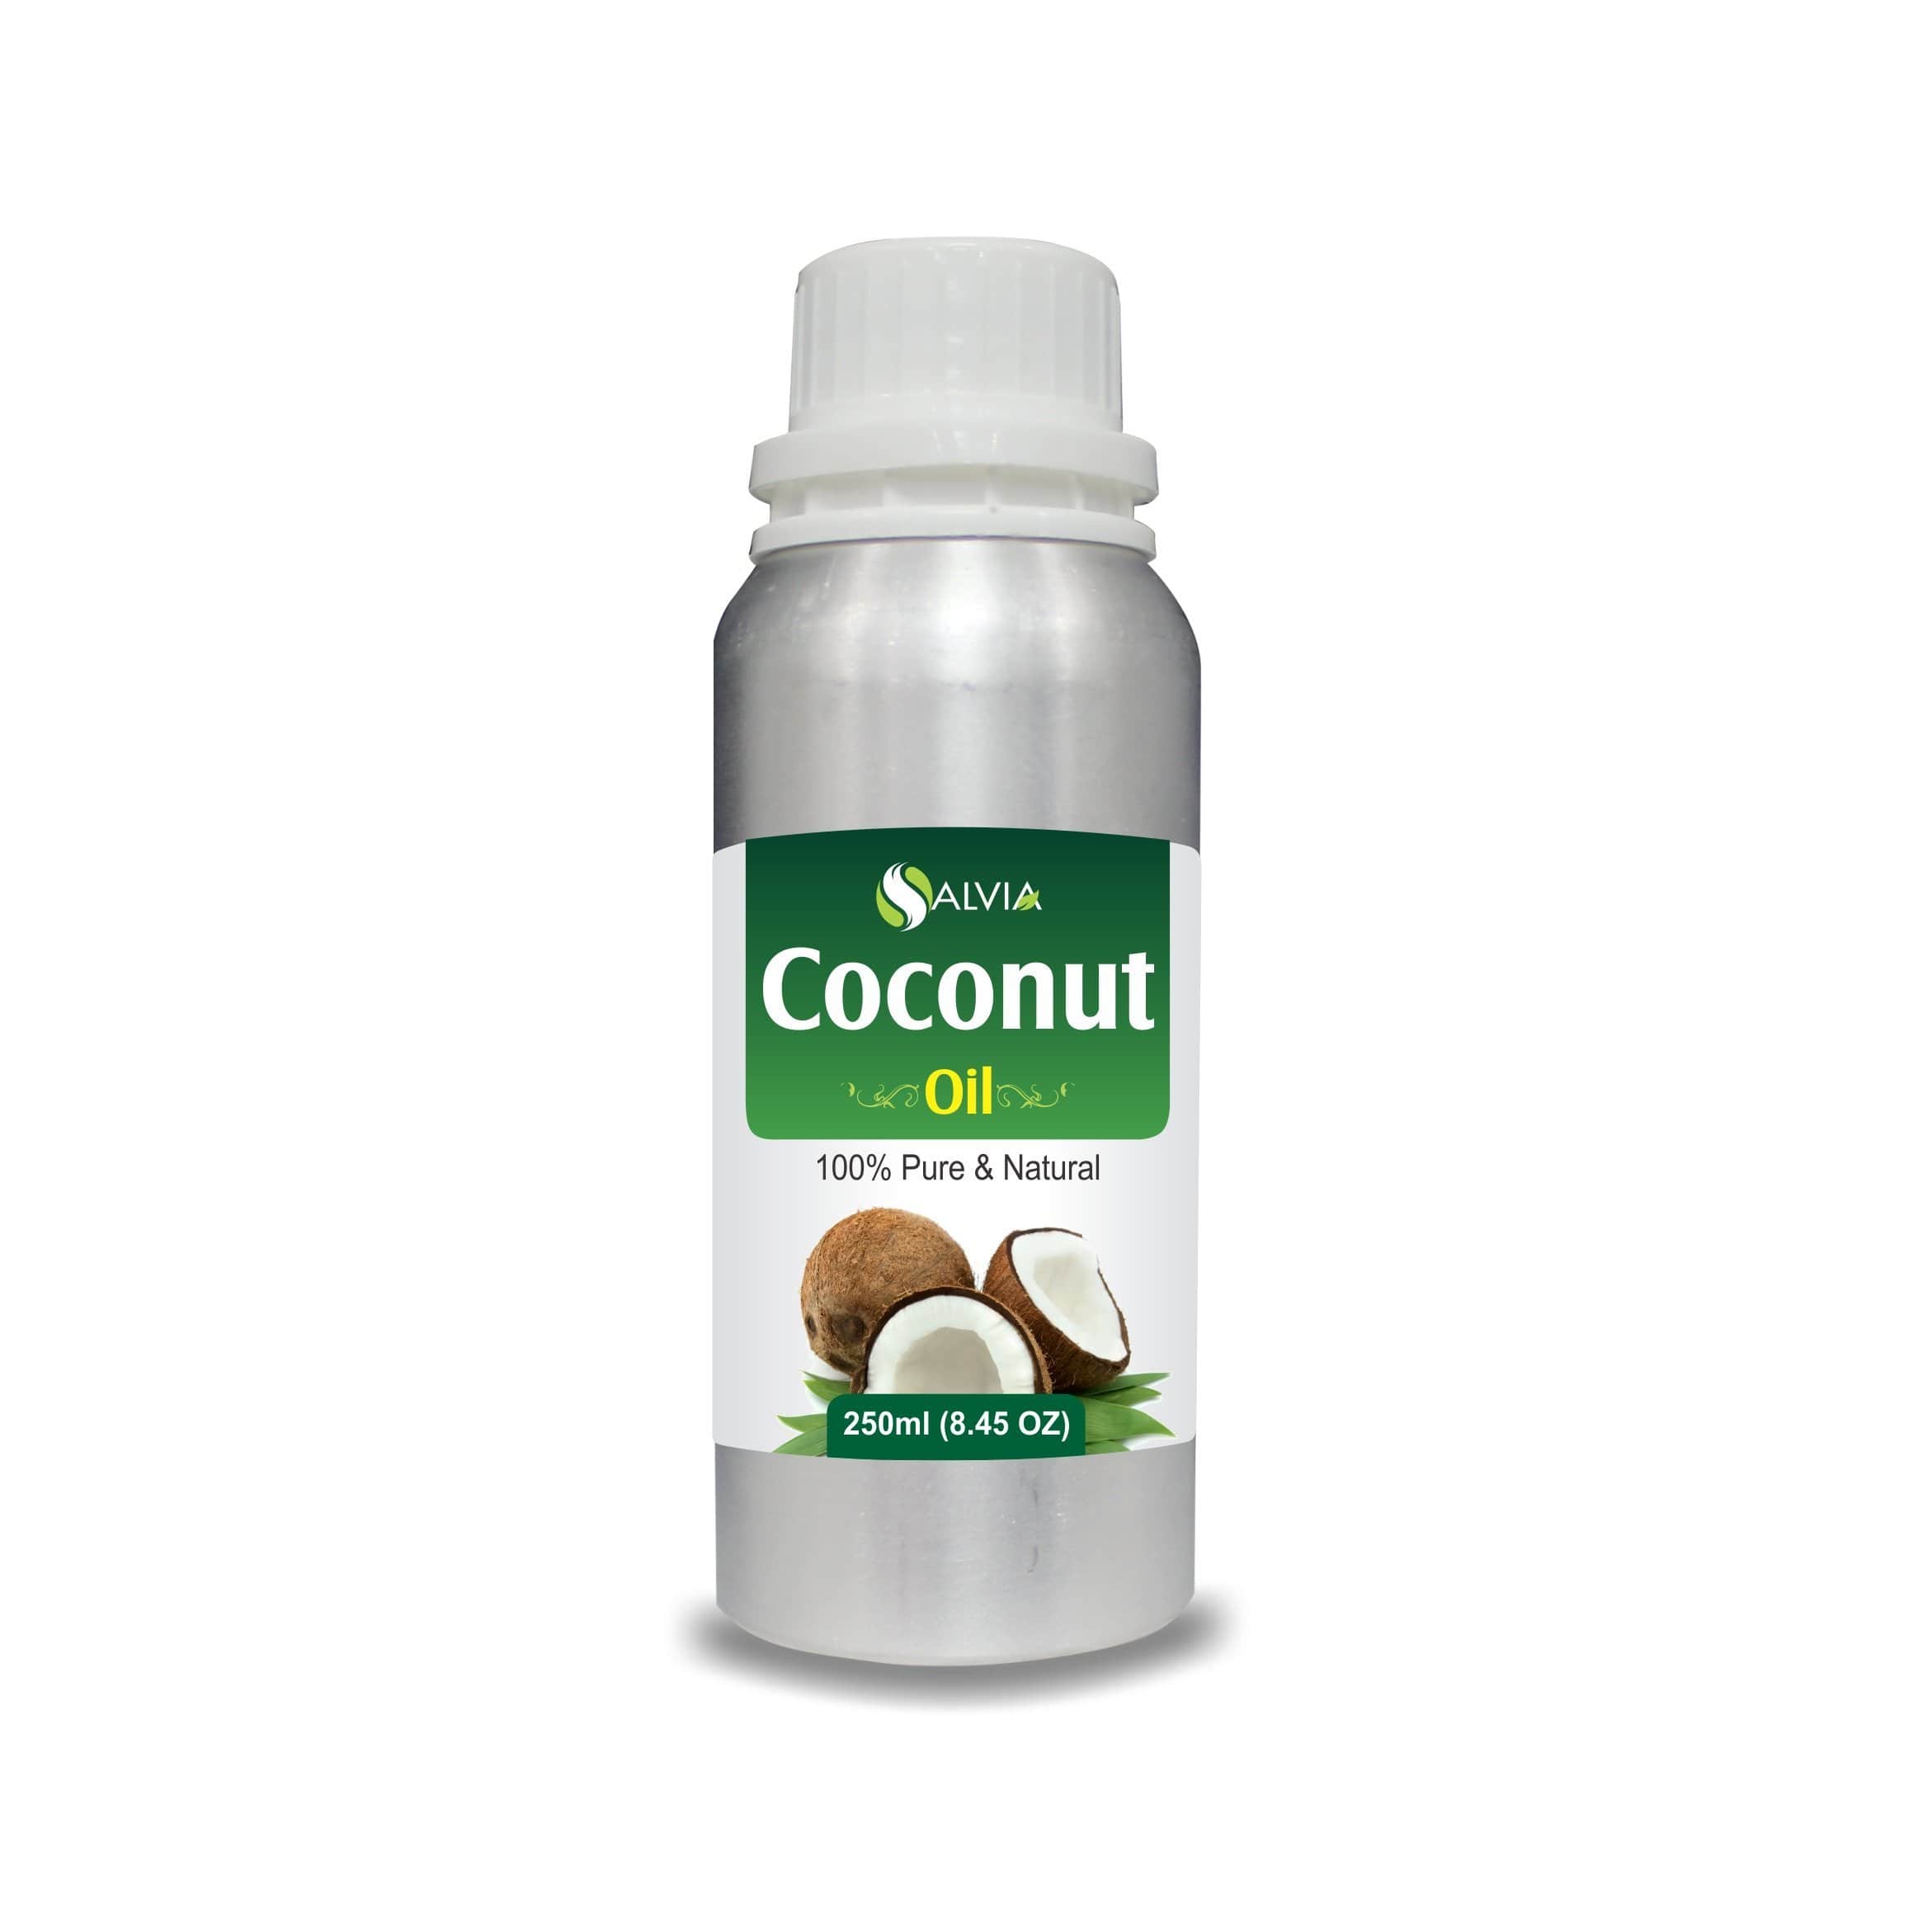 Coconut oil uses